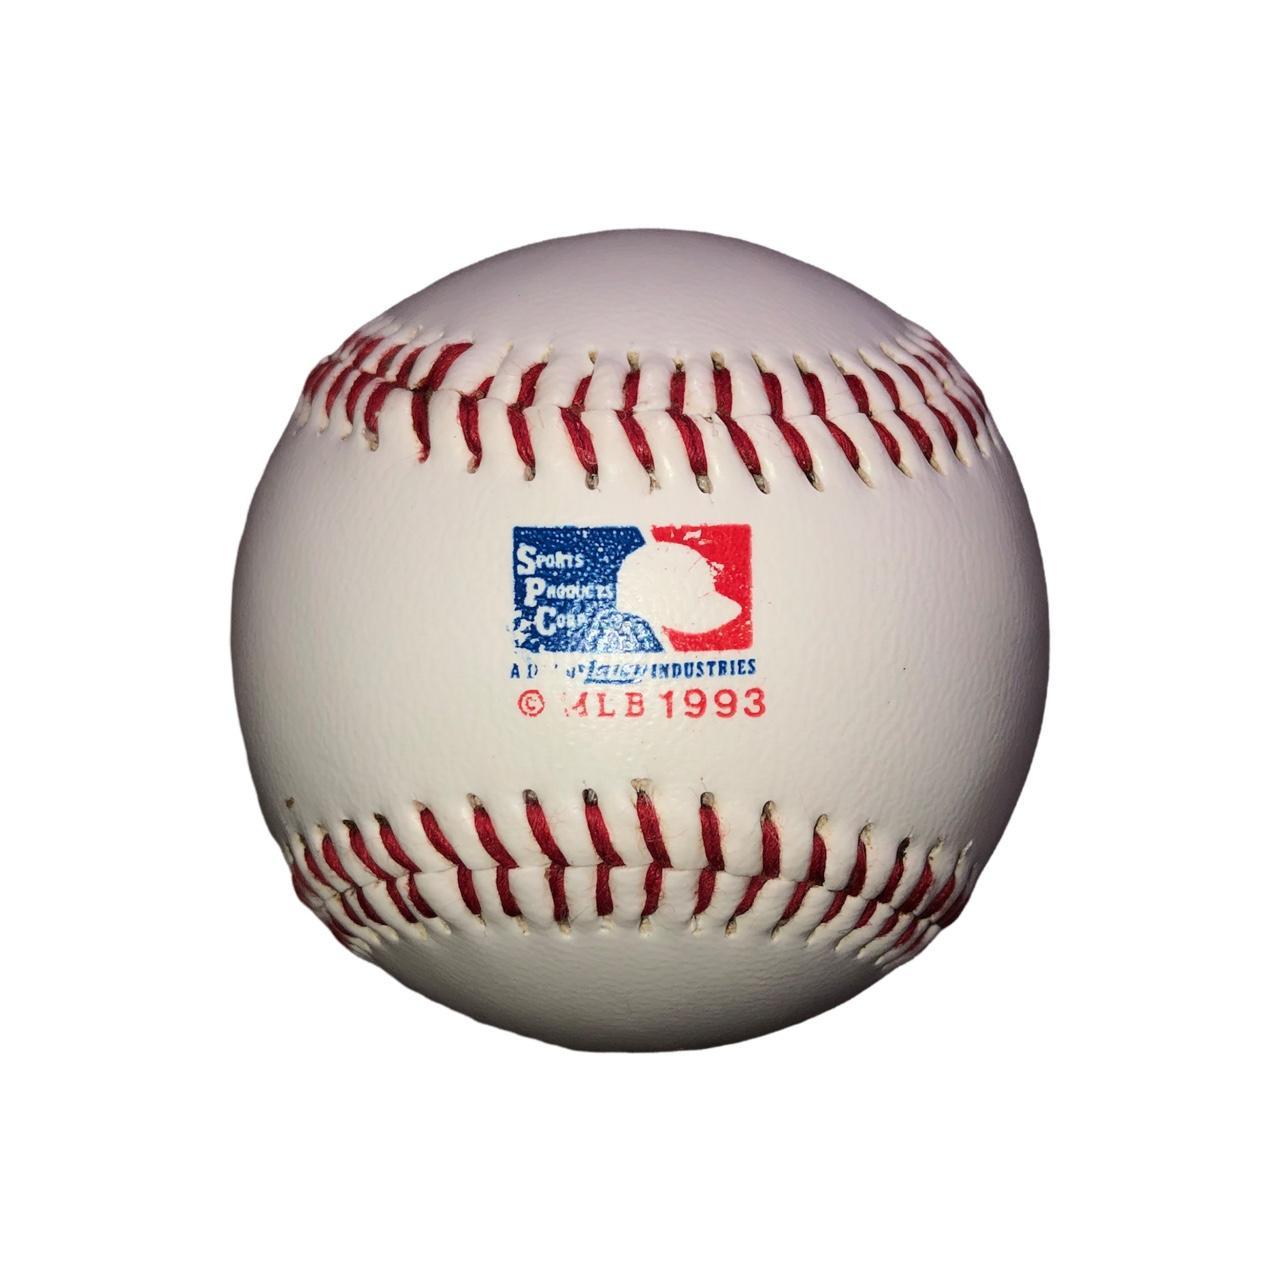 Product Image 2 - Vintage Houston Astros Laich Baseball
Dated: